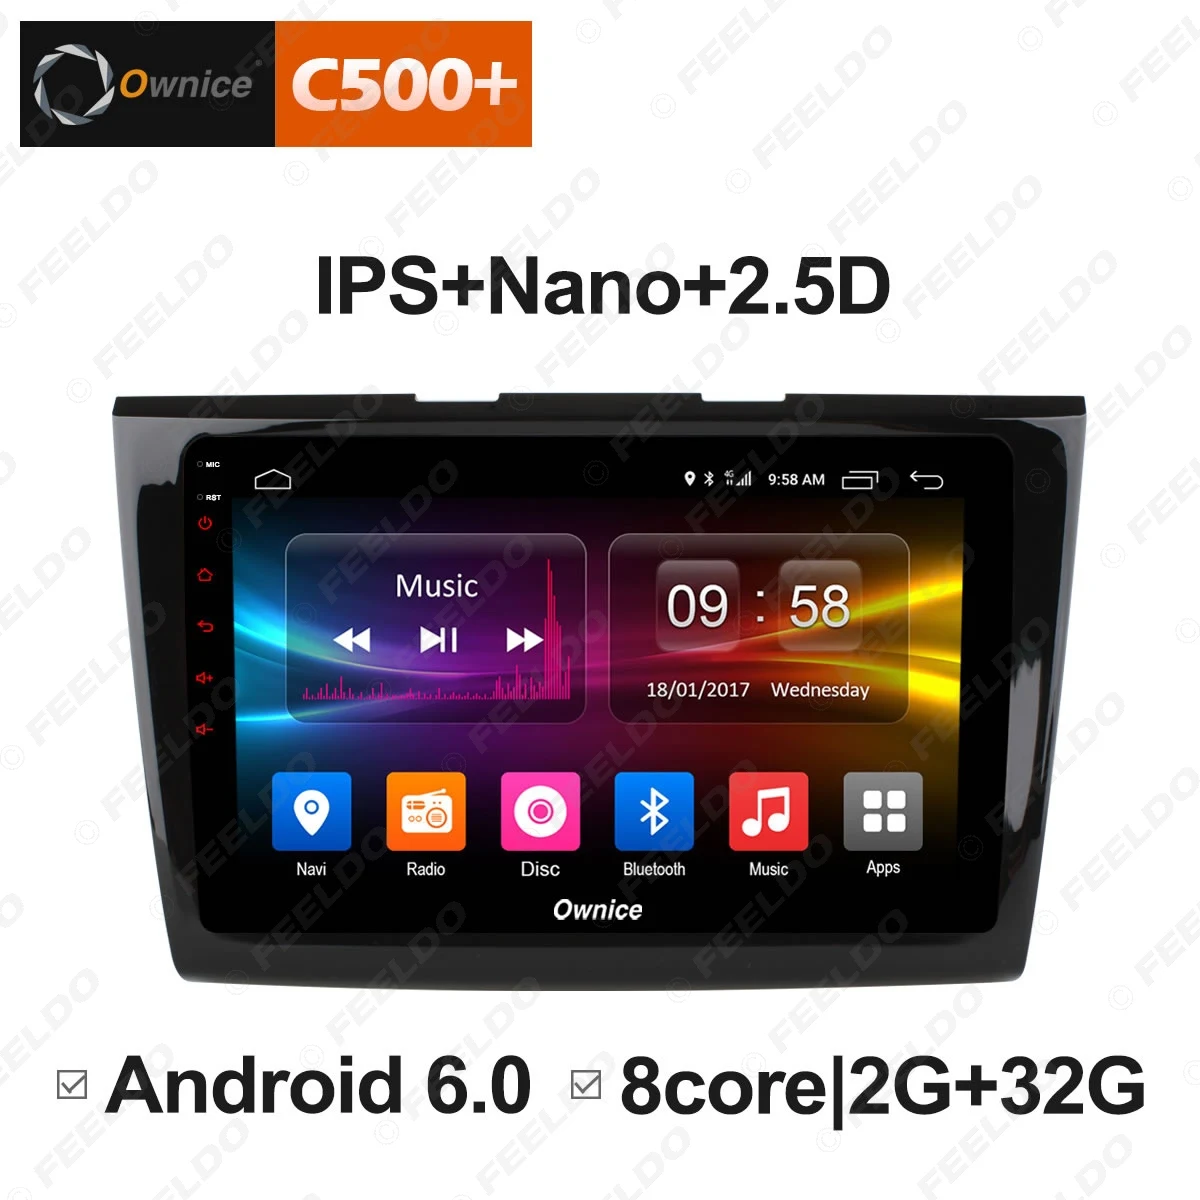 Top FEELDO 9" Android 6.0 4-Core/DDR3 1G/16G/Support 4G Dongle Car Media Player With GPS/FM/AM RDS Radio For  Taurus 2015-2017 2